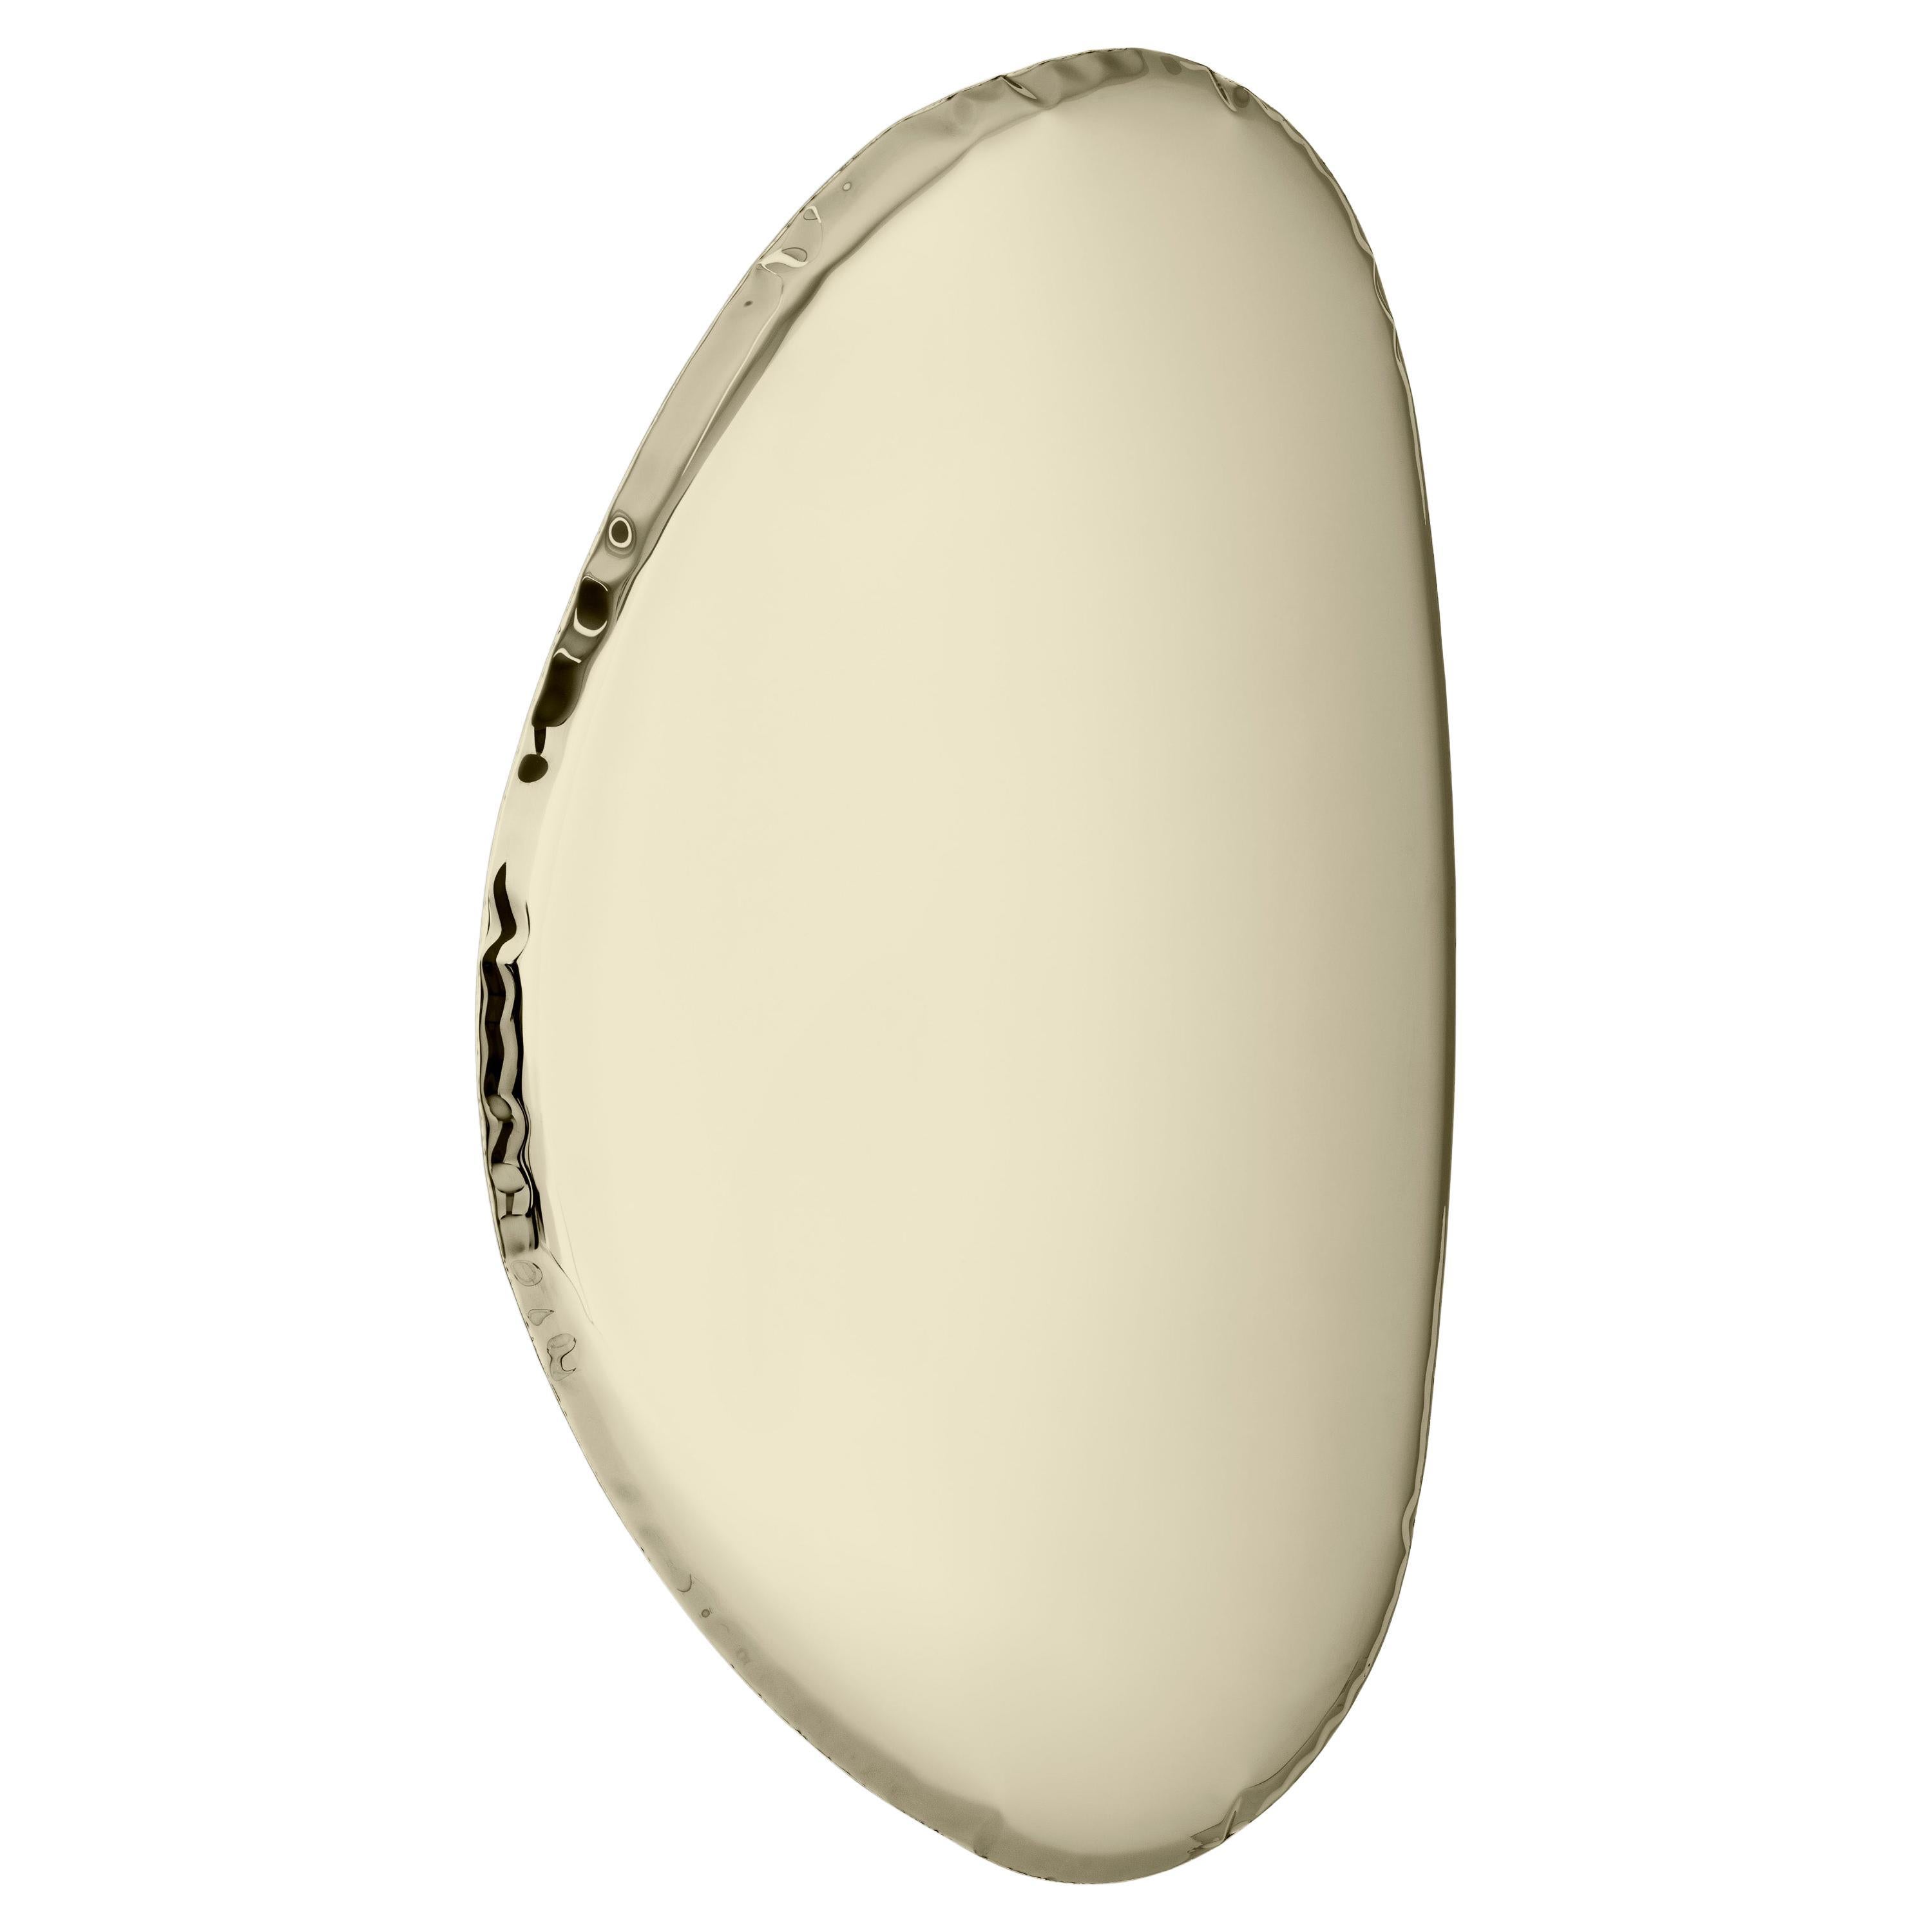 Tafla O2 Polished Stainless Steel Light Gold Color Wall Mirror by Zieta